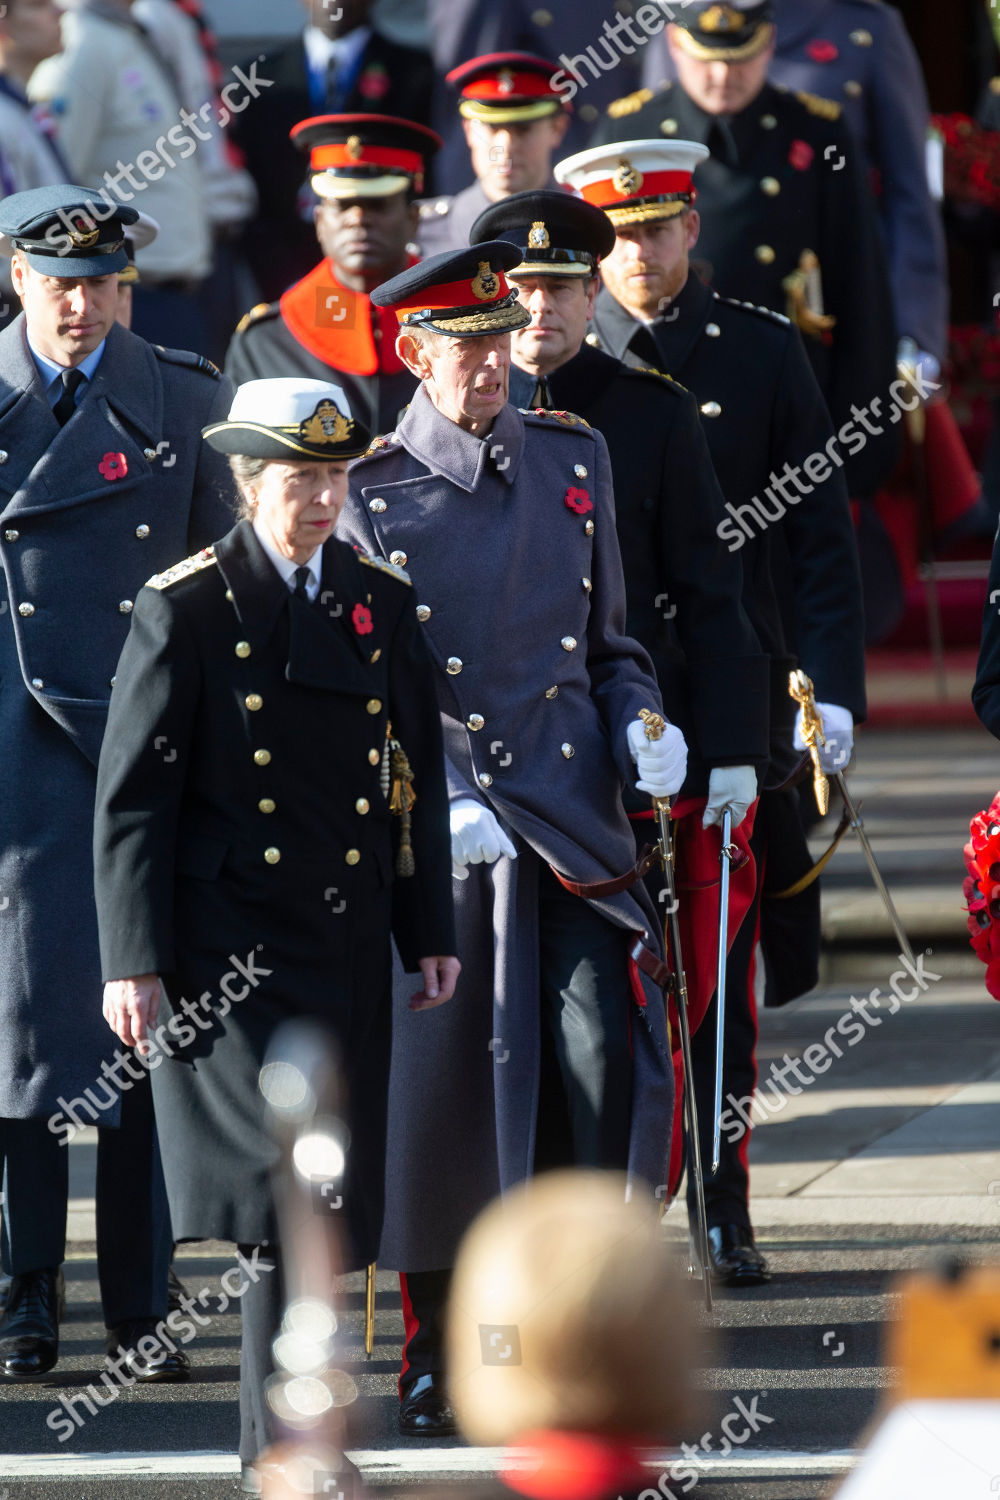 remembrance-day-service-the-cenotaph-whitehall-london-uk-shutterstock-editorial-10470895g.jpg